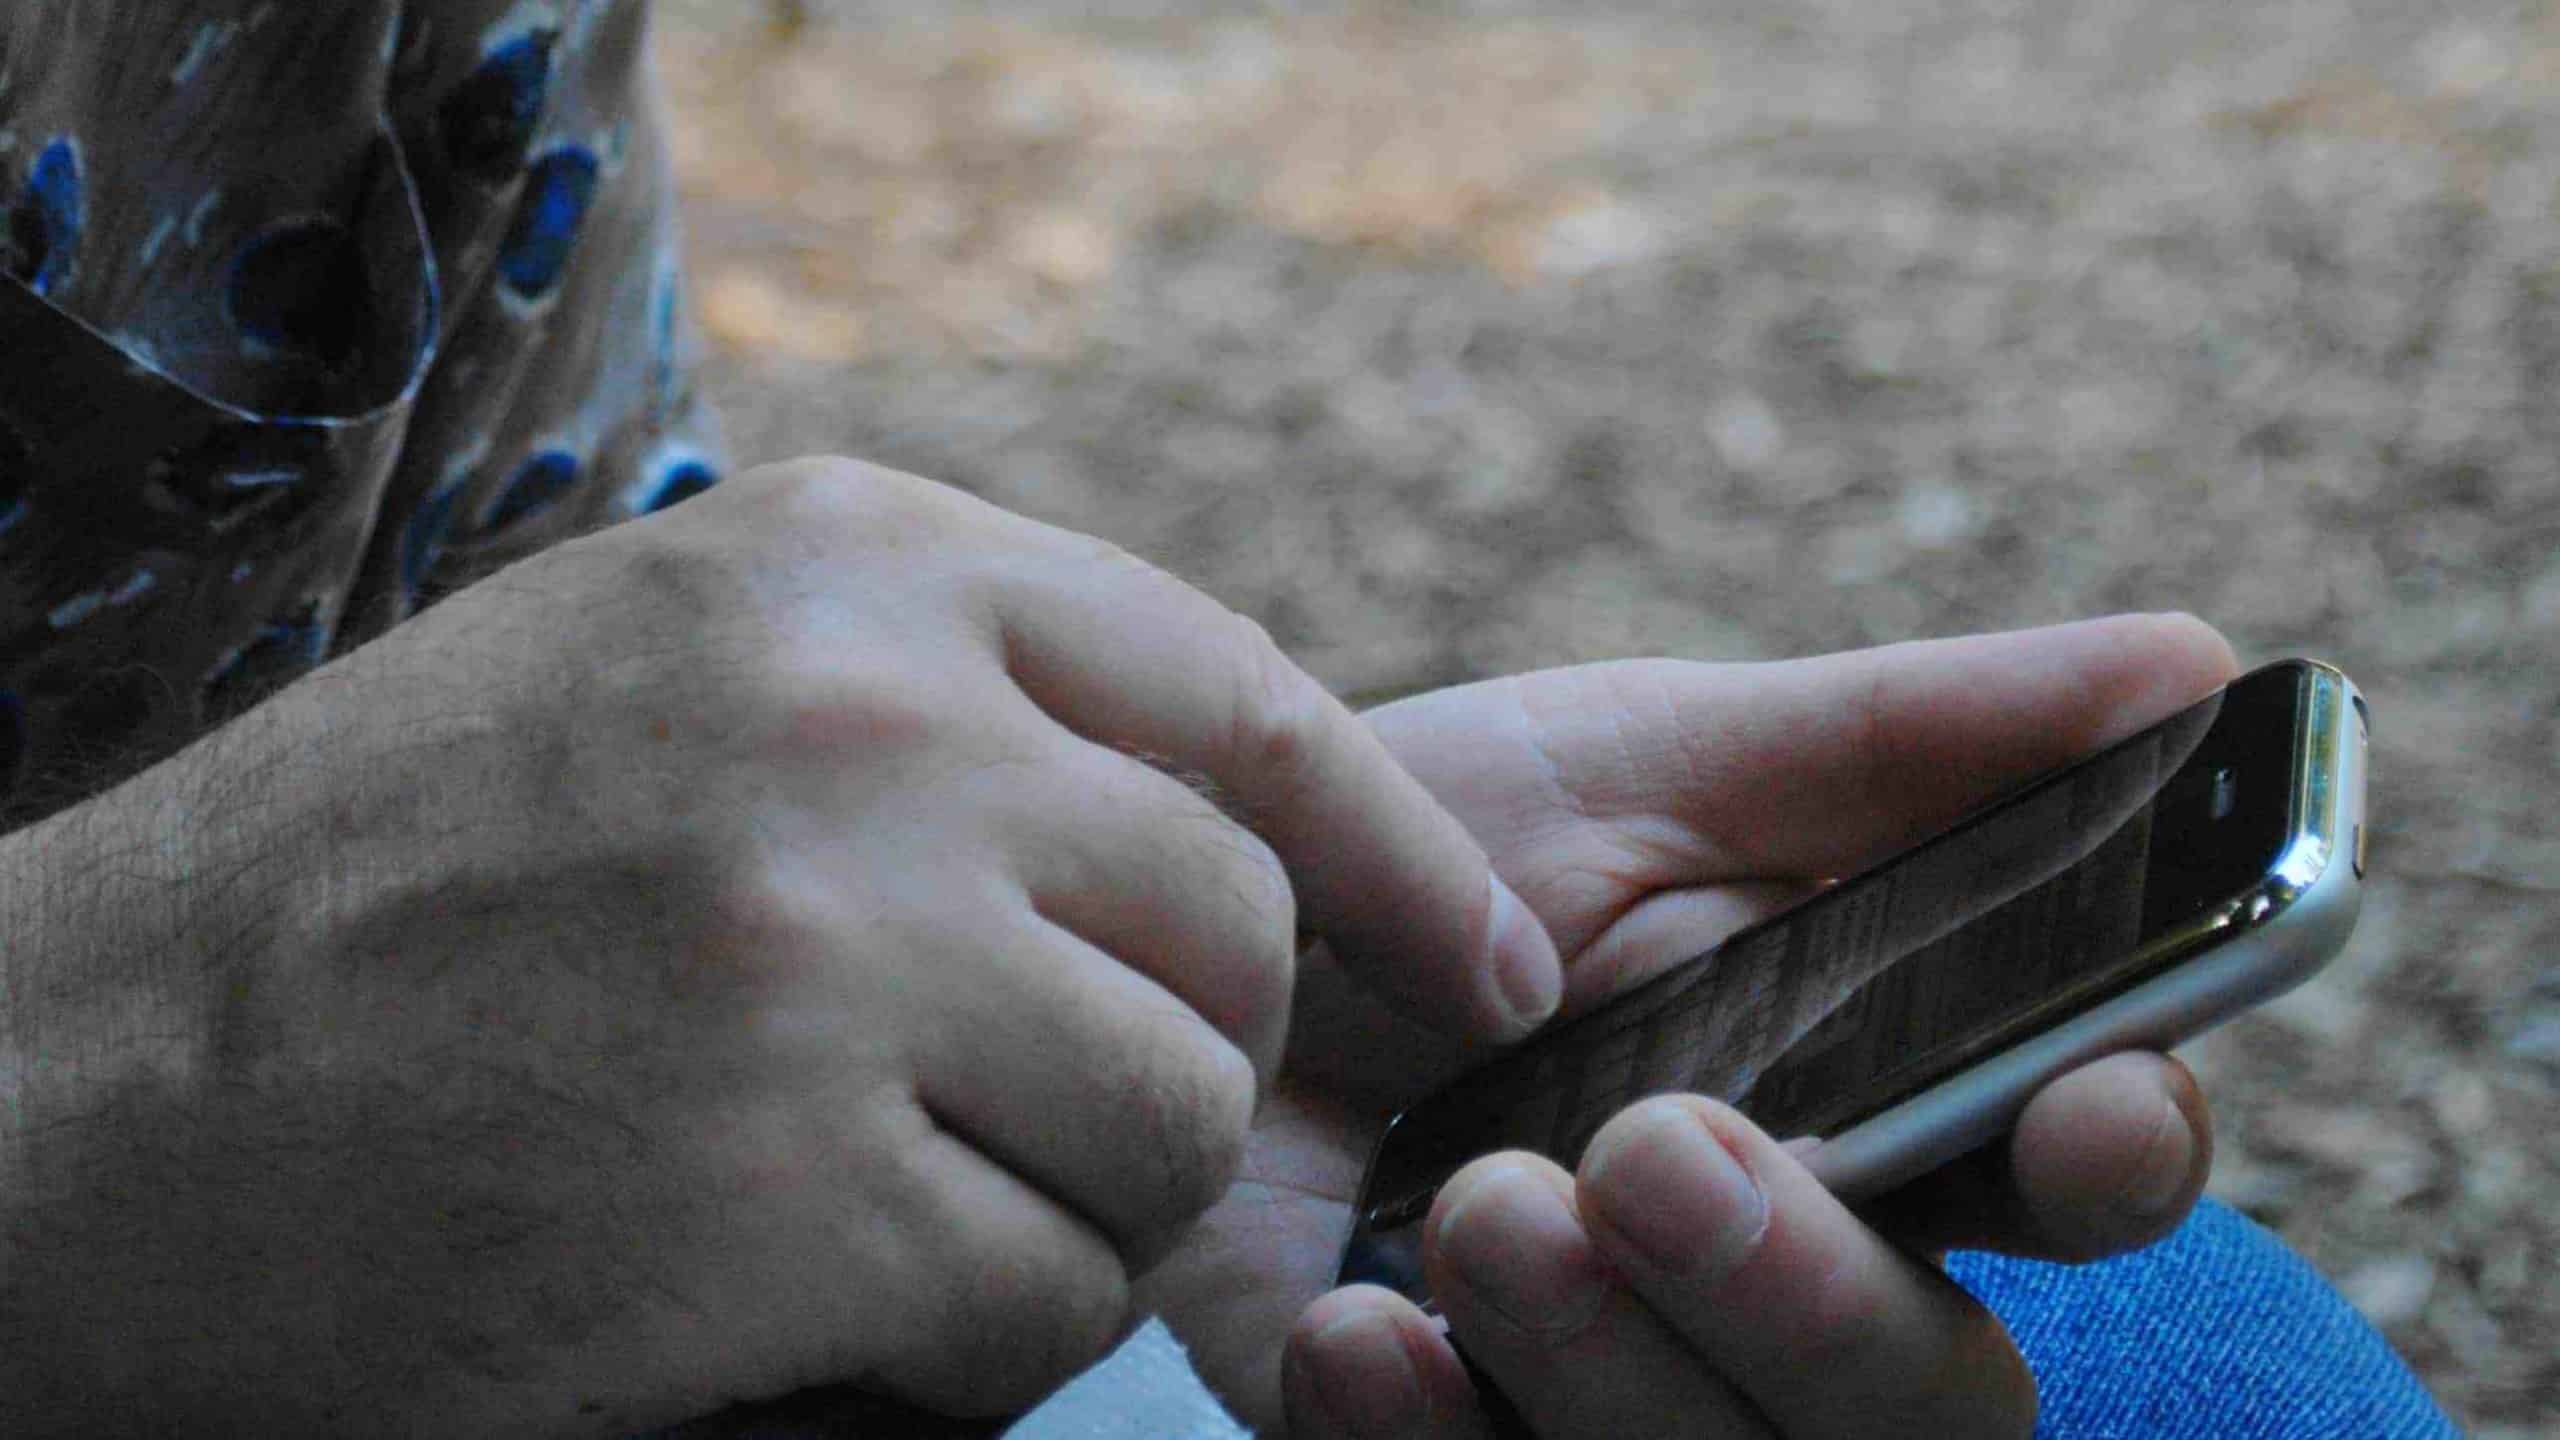 Hands tap the screen of an iphone. Creative Commons photo courtesy of Lisa Padilla